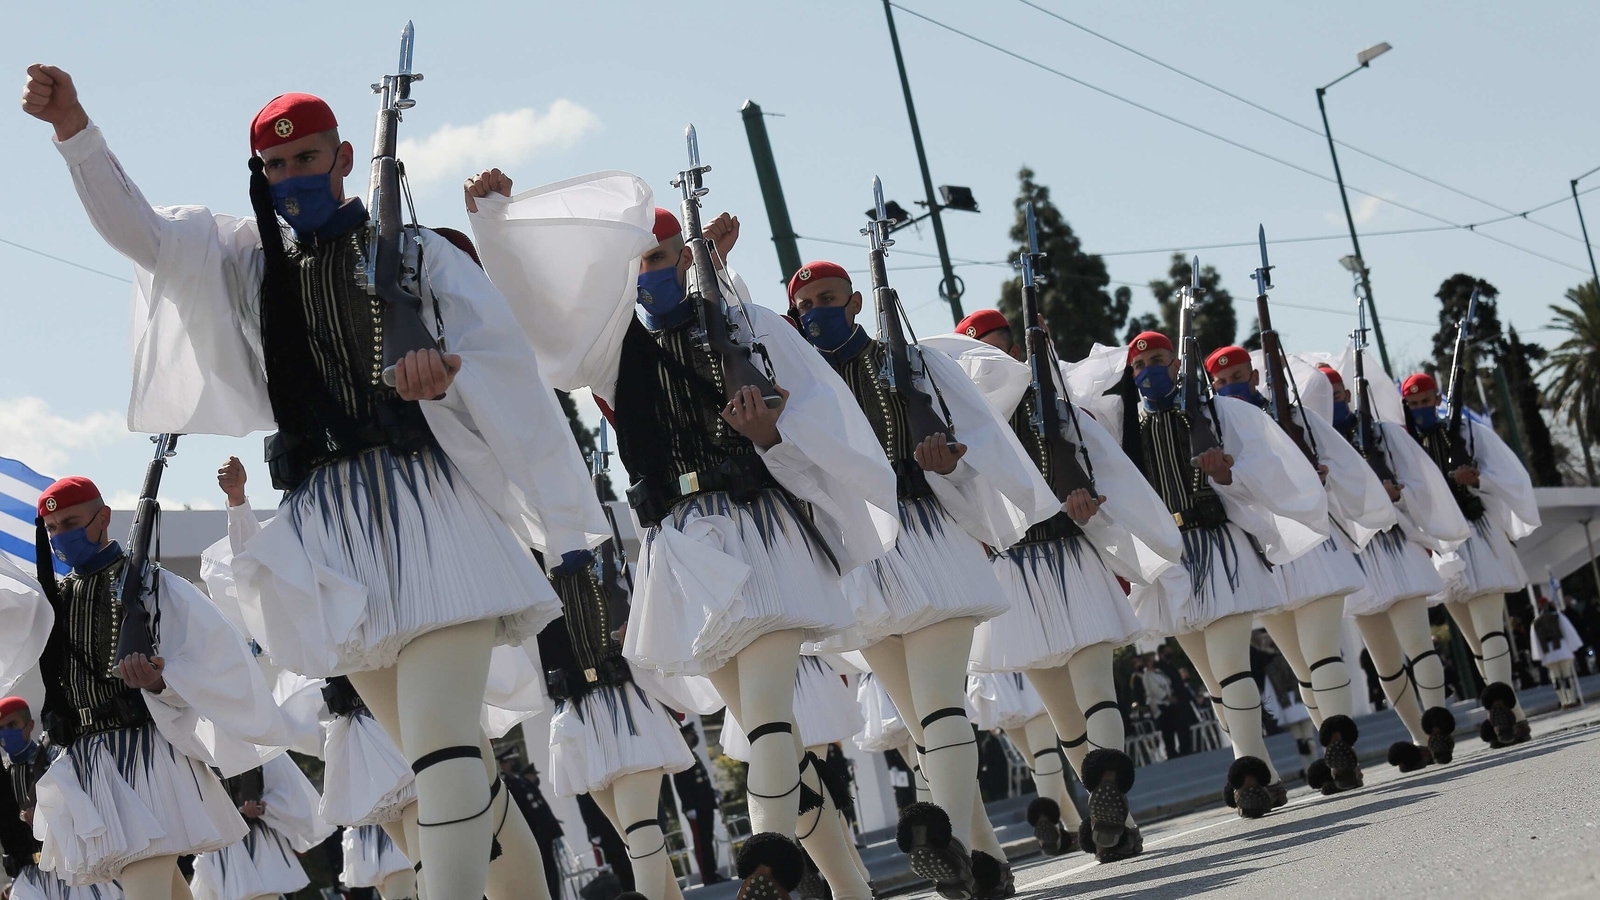 Greek Independence Day events culminate in military parade World News